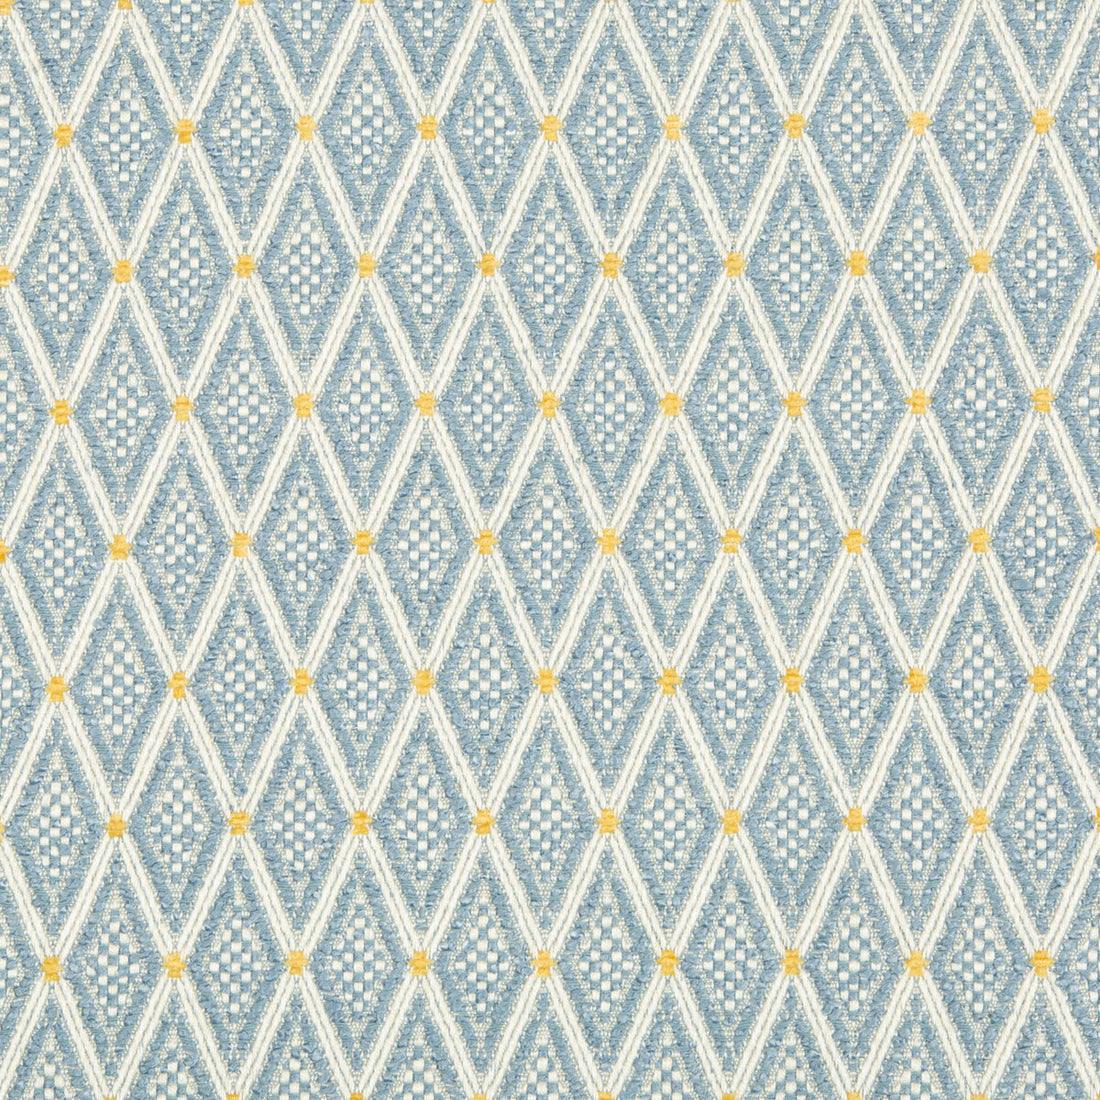 Kravet Design fabric in 34699-54 color - pattern 34699.54.0 - by Kravet Design in the Crypton Home collection